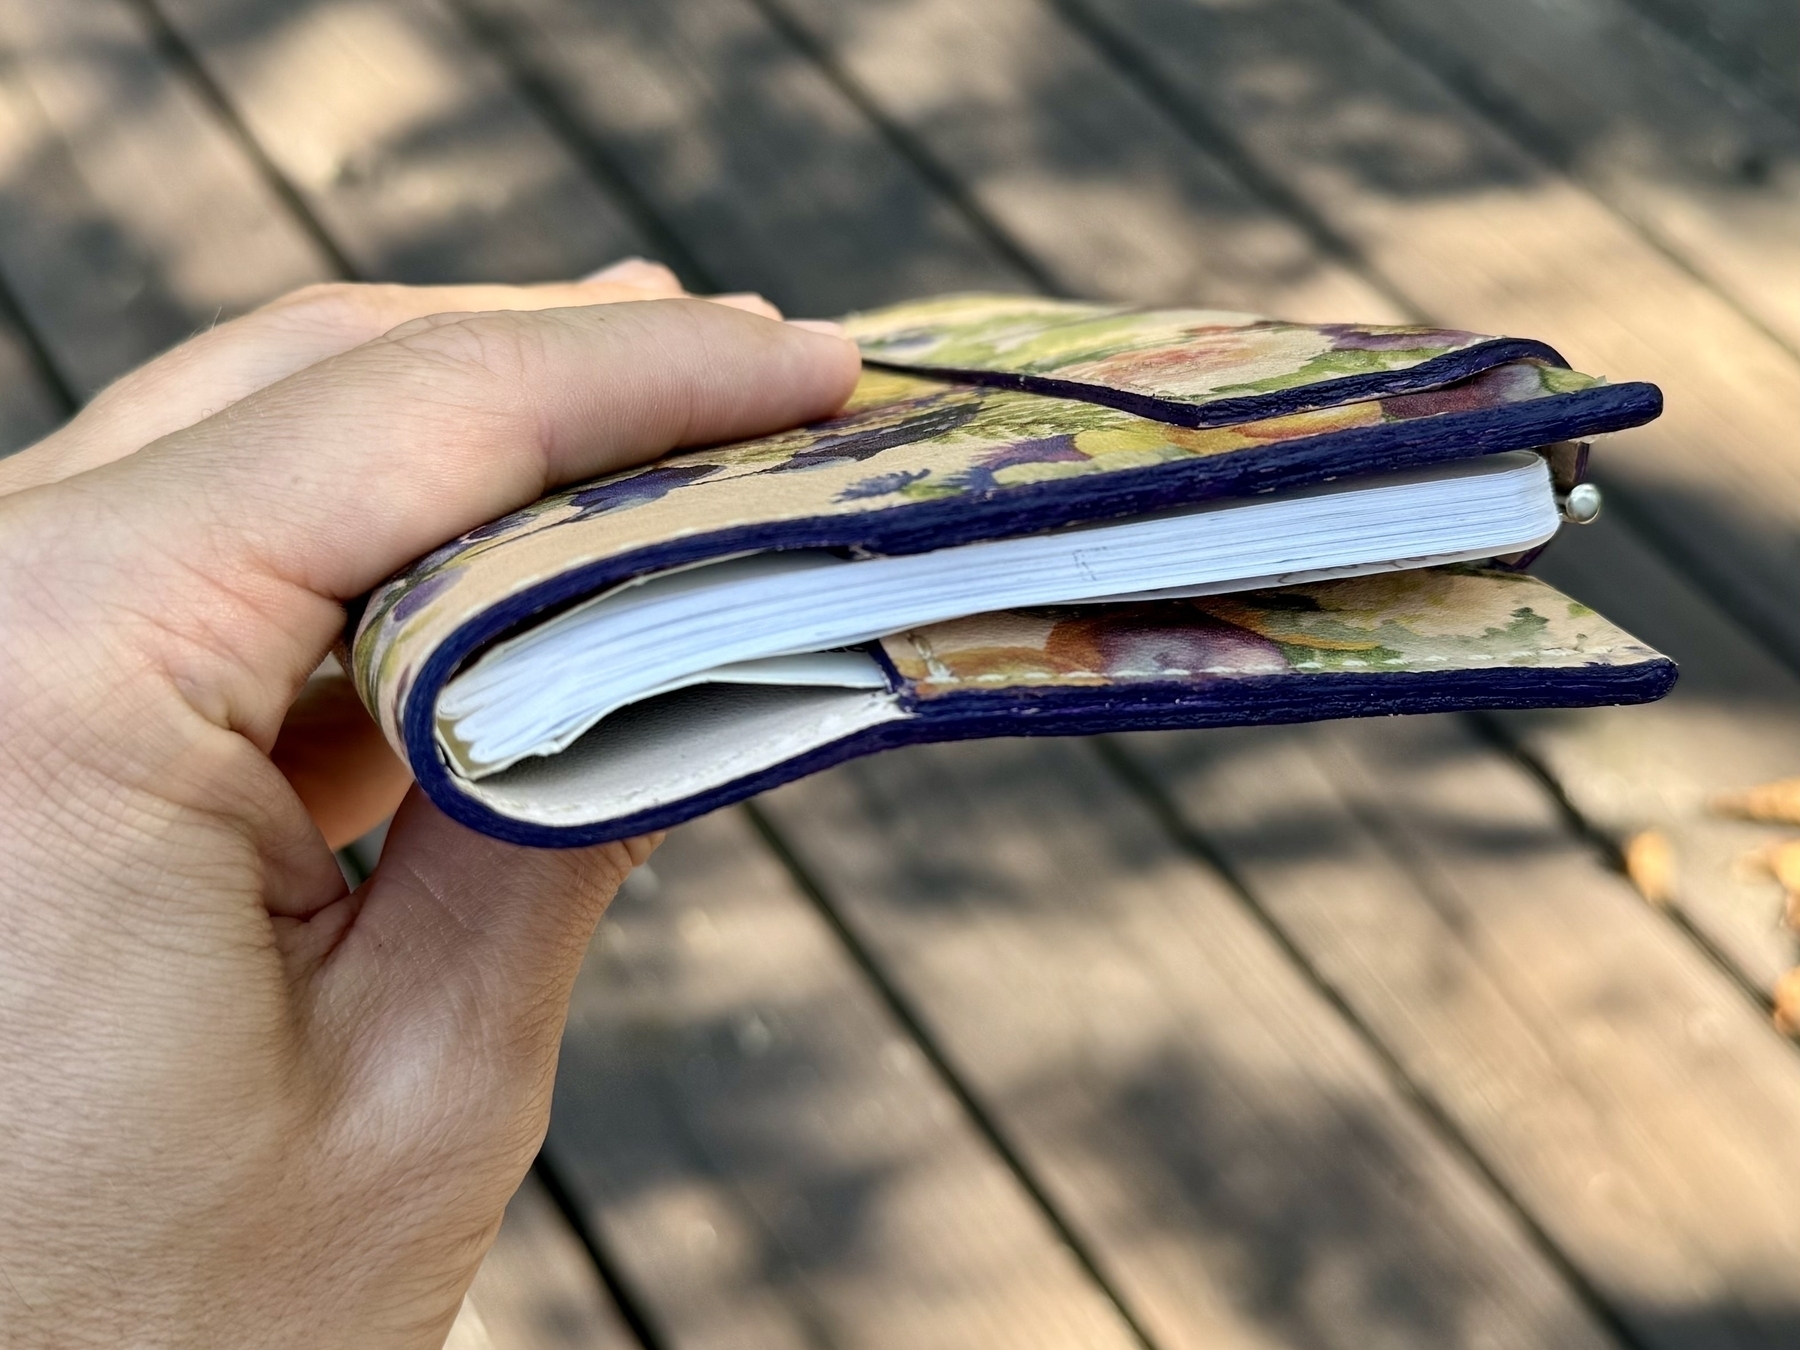 A hand is holding a small, colorful floral-patterned notebook or wallet with a curvy edge.